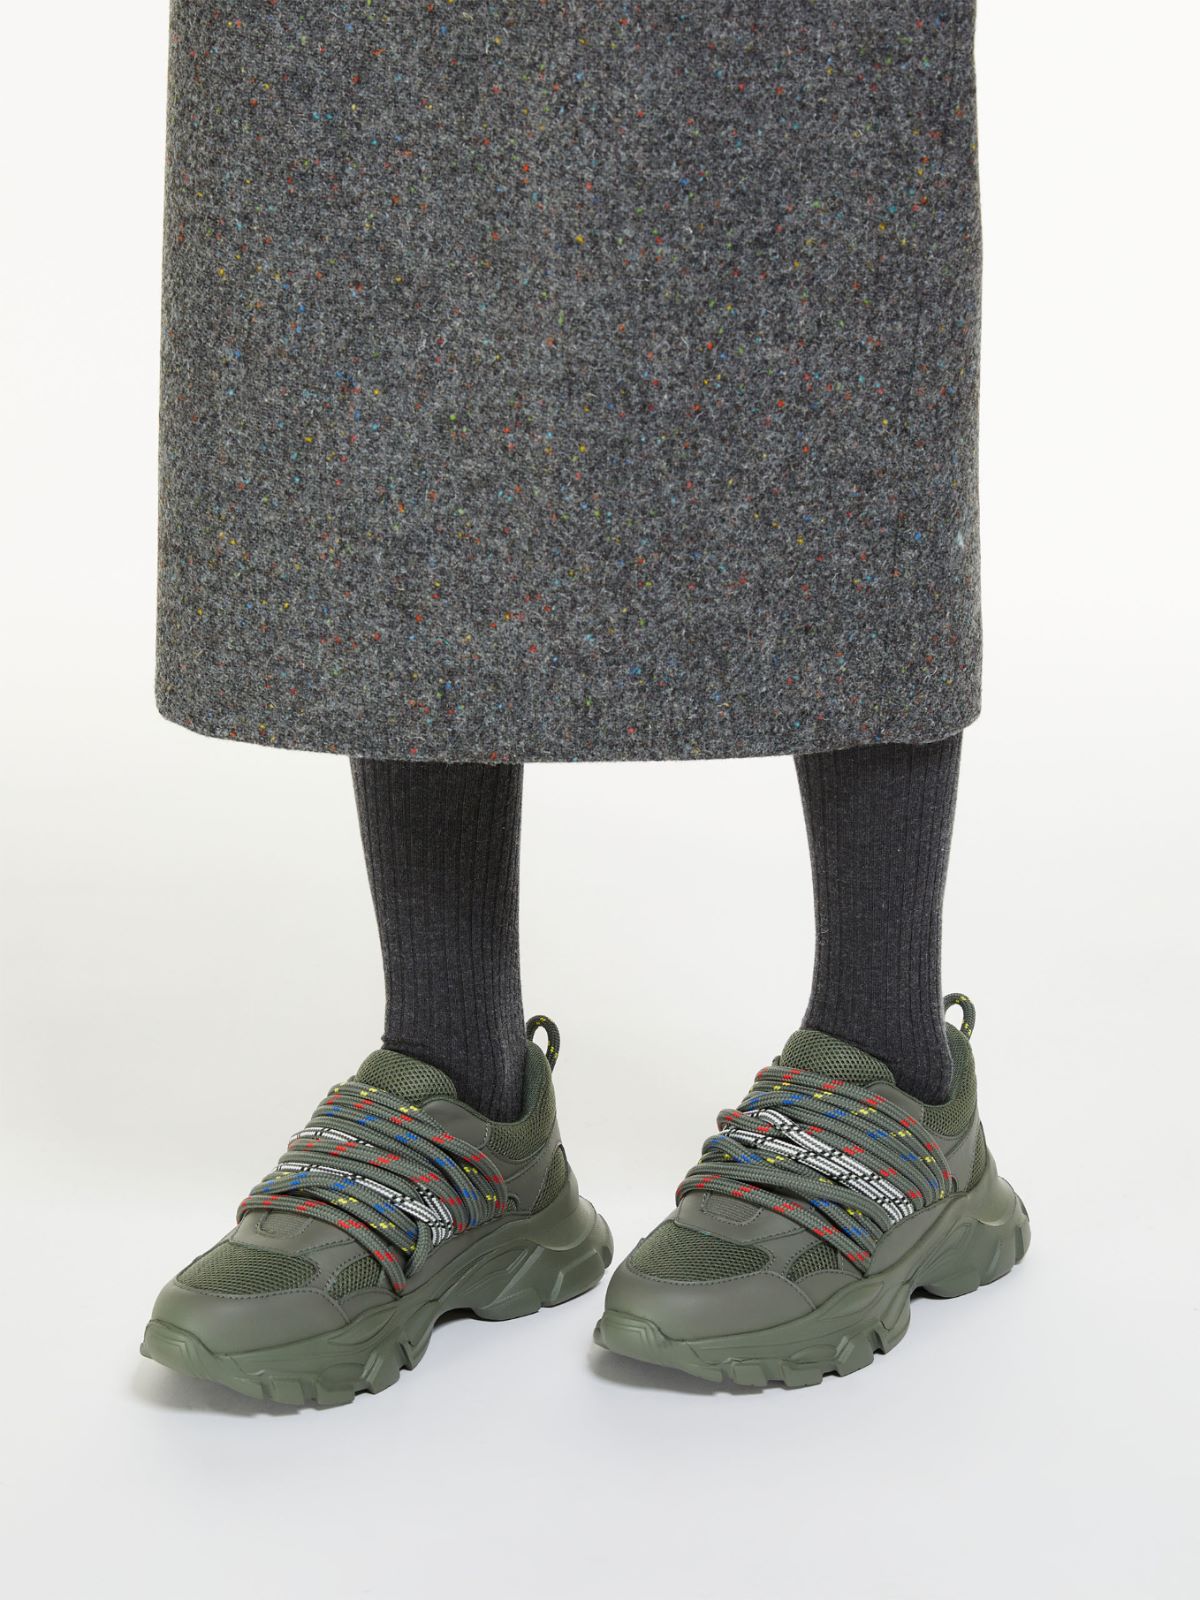 Sneakers in technical mesh and leather - DARK GREY GREEN - Weekend Max Mara - 7